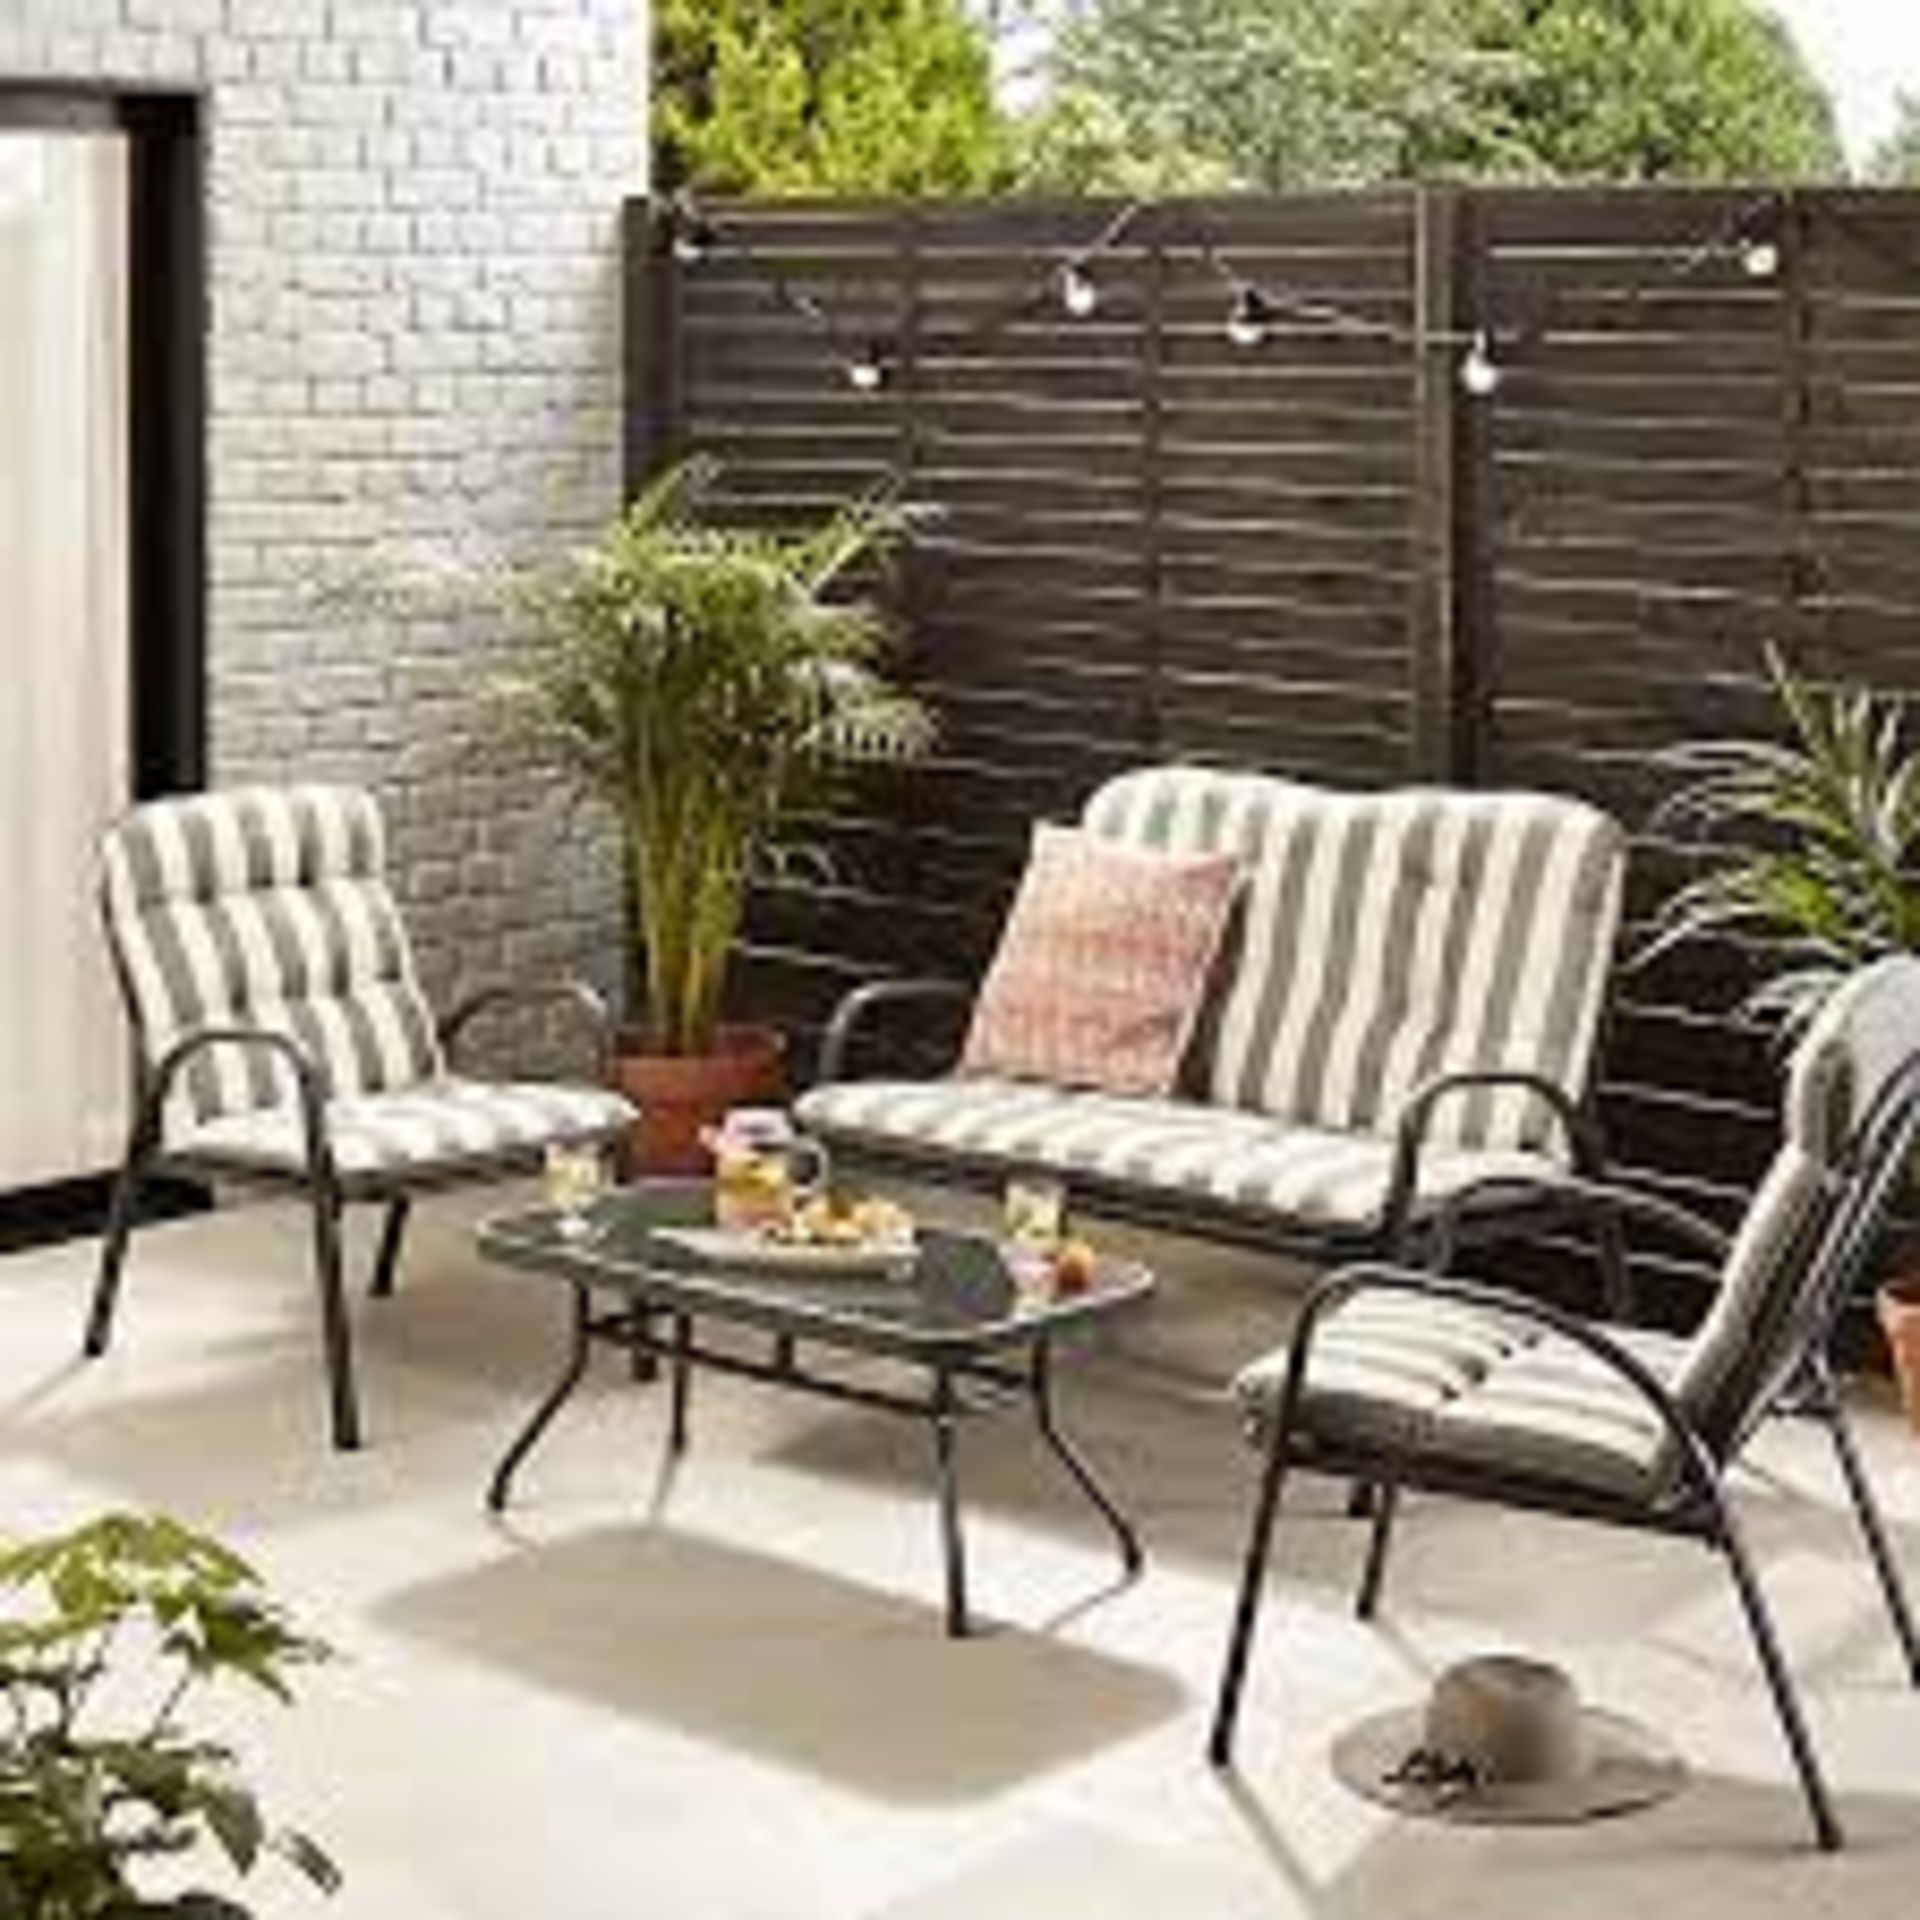 Colorado Grey Metal 4 Seater Coffee set. - ER48. RRP £475.00. This 4 seater set is perfect for - Image 2 of 2